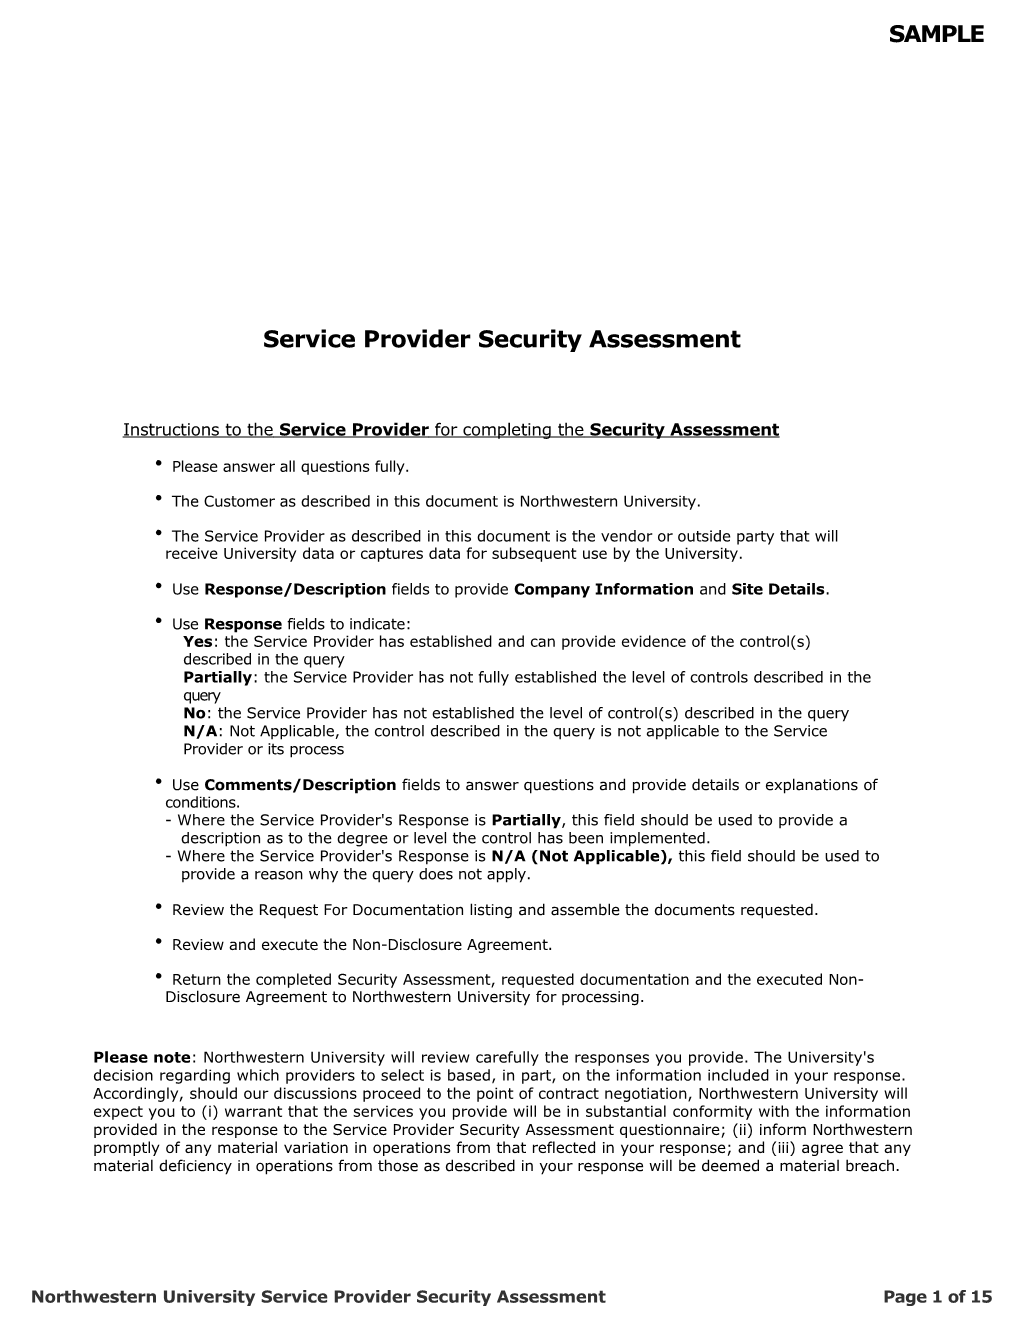 Service Provider Security Assessment